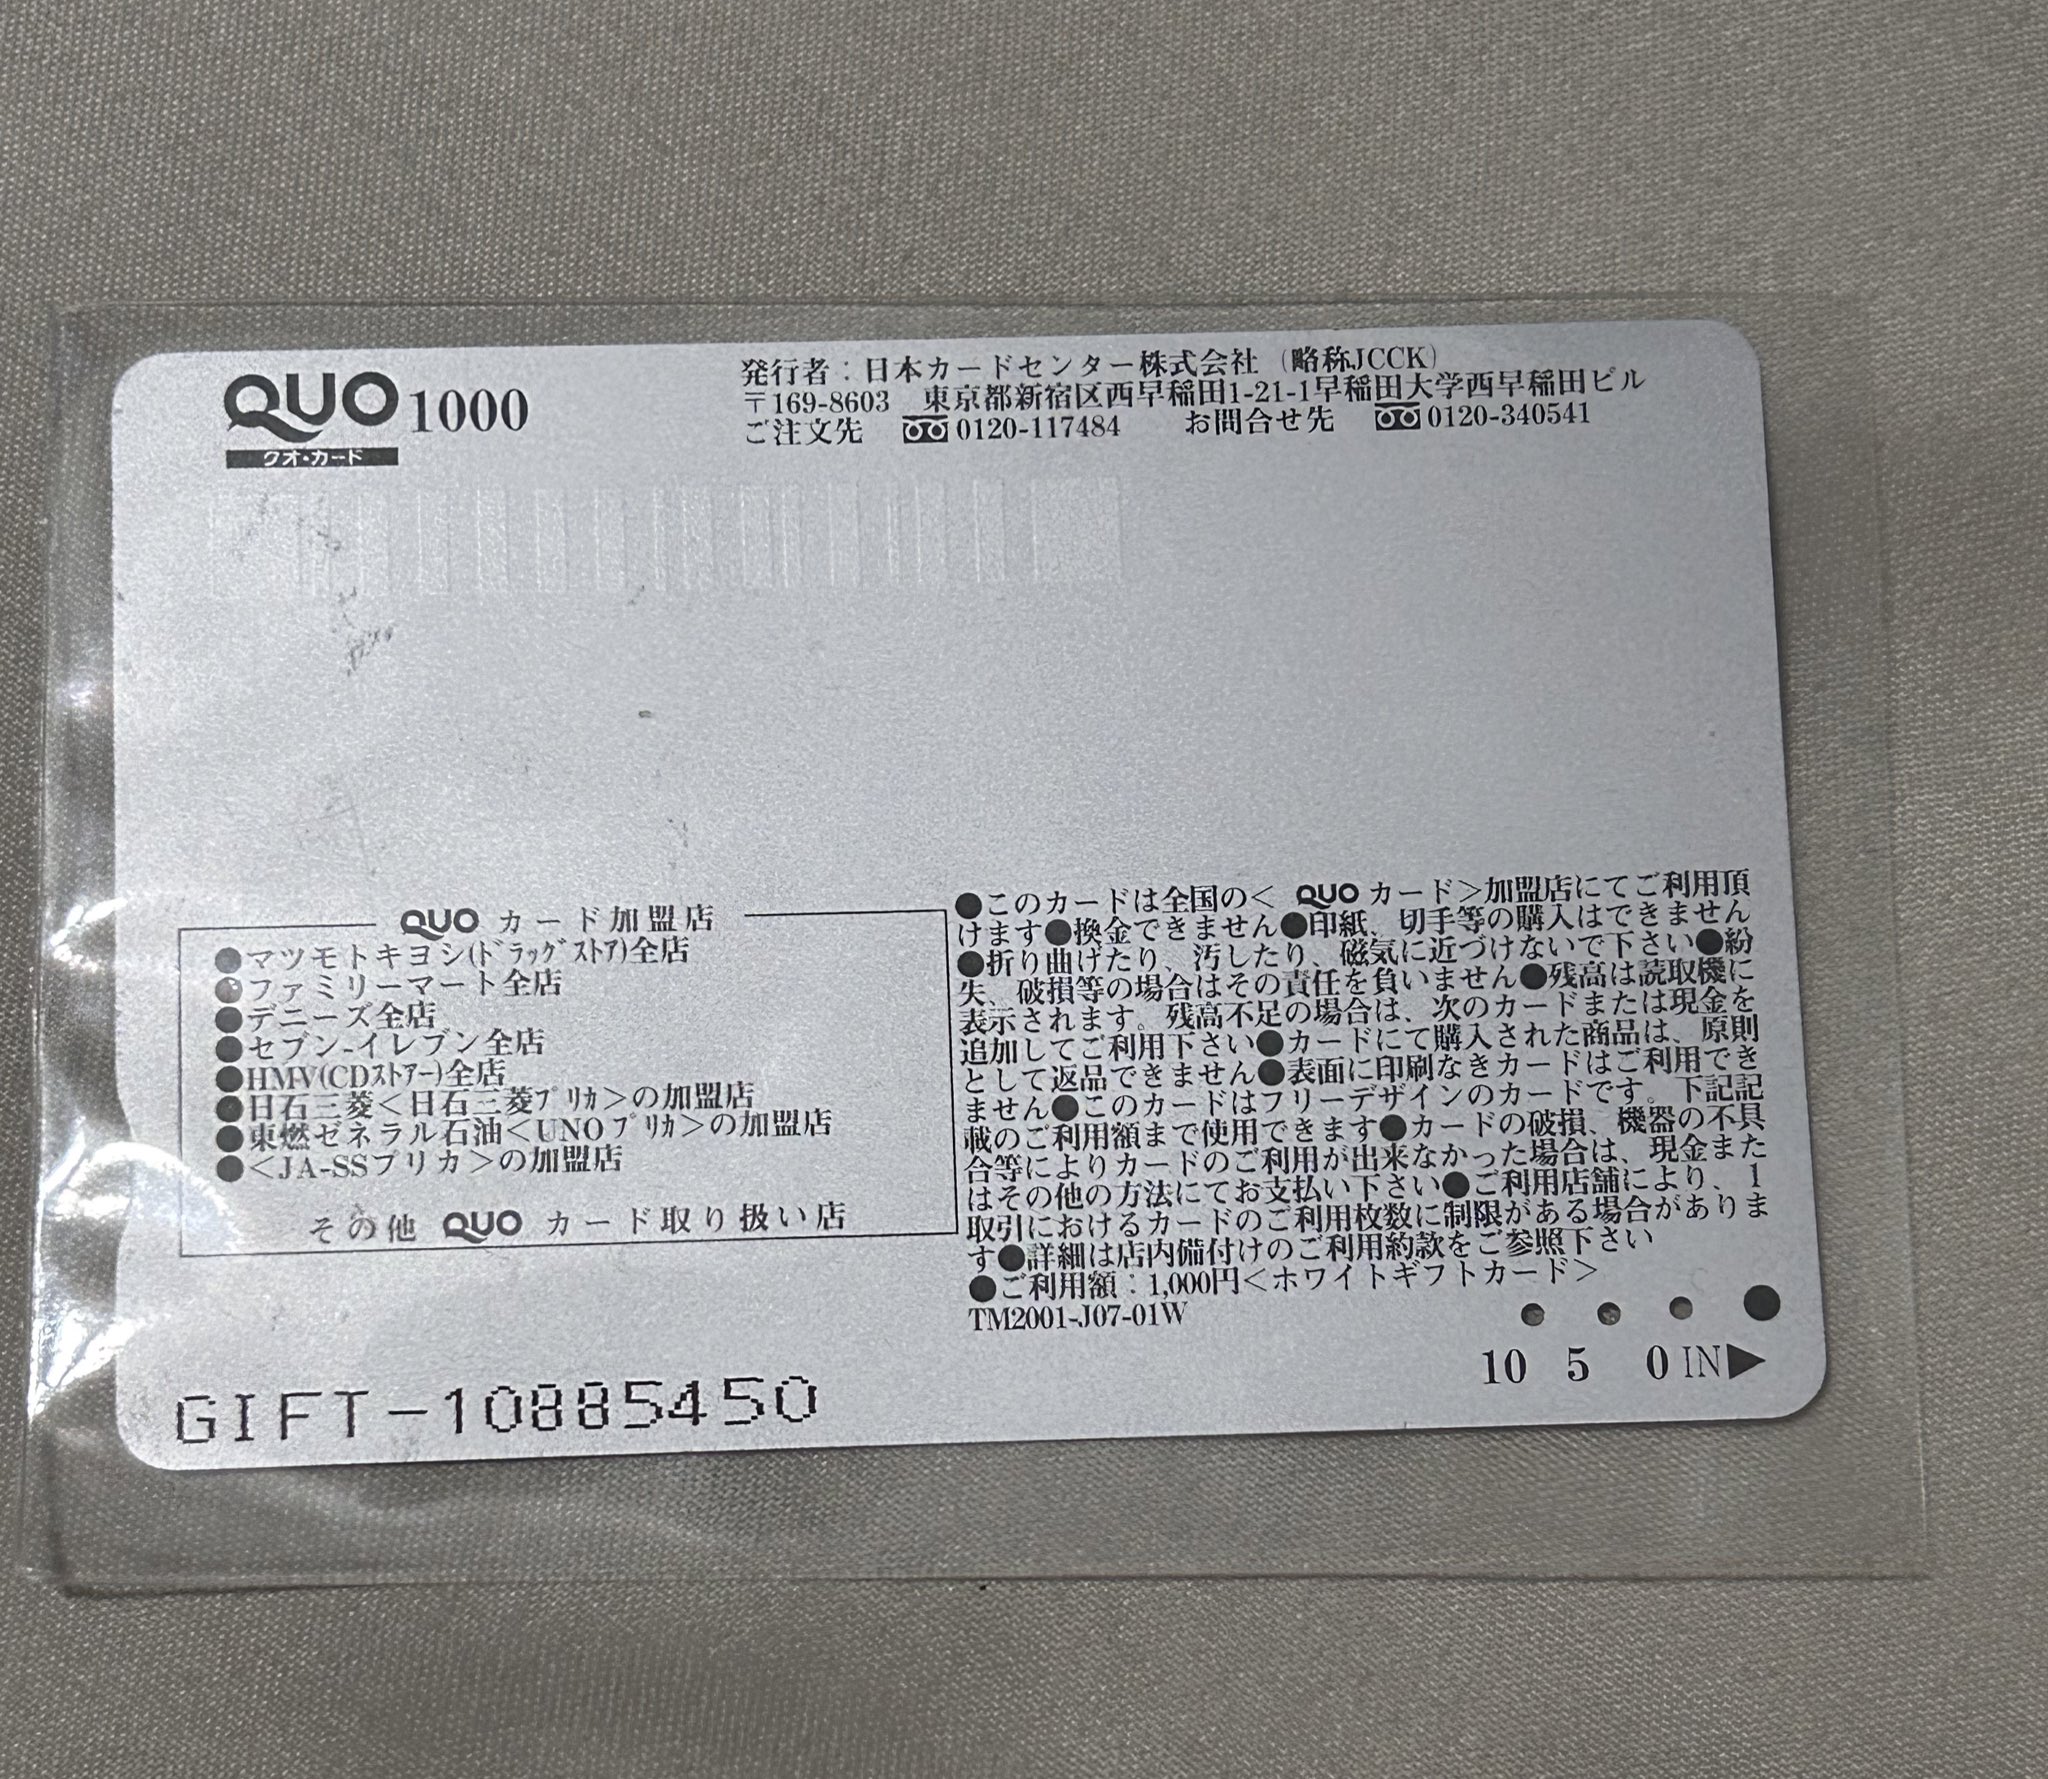 back of the giftcard showing a grey bg with lots of fine print in japanese. it's also in a platic sheet.